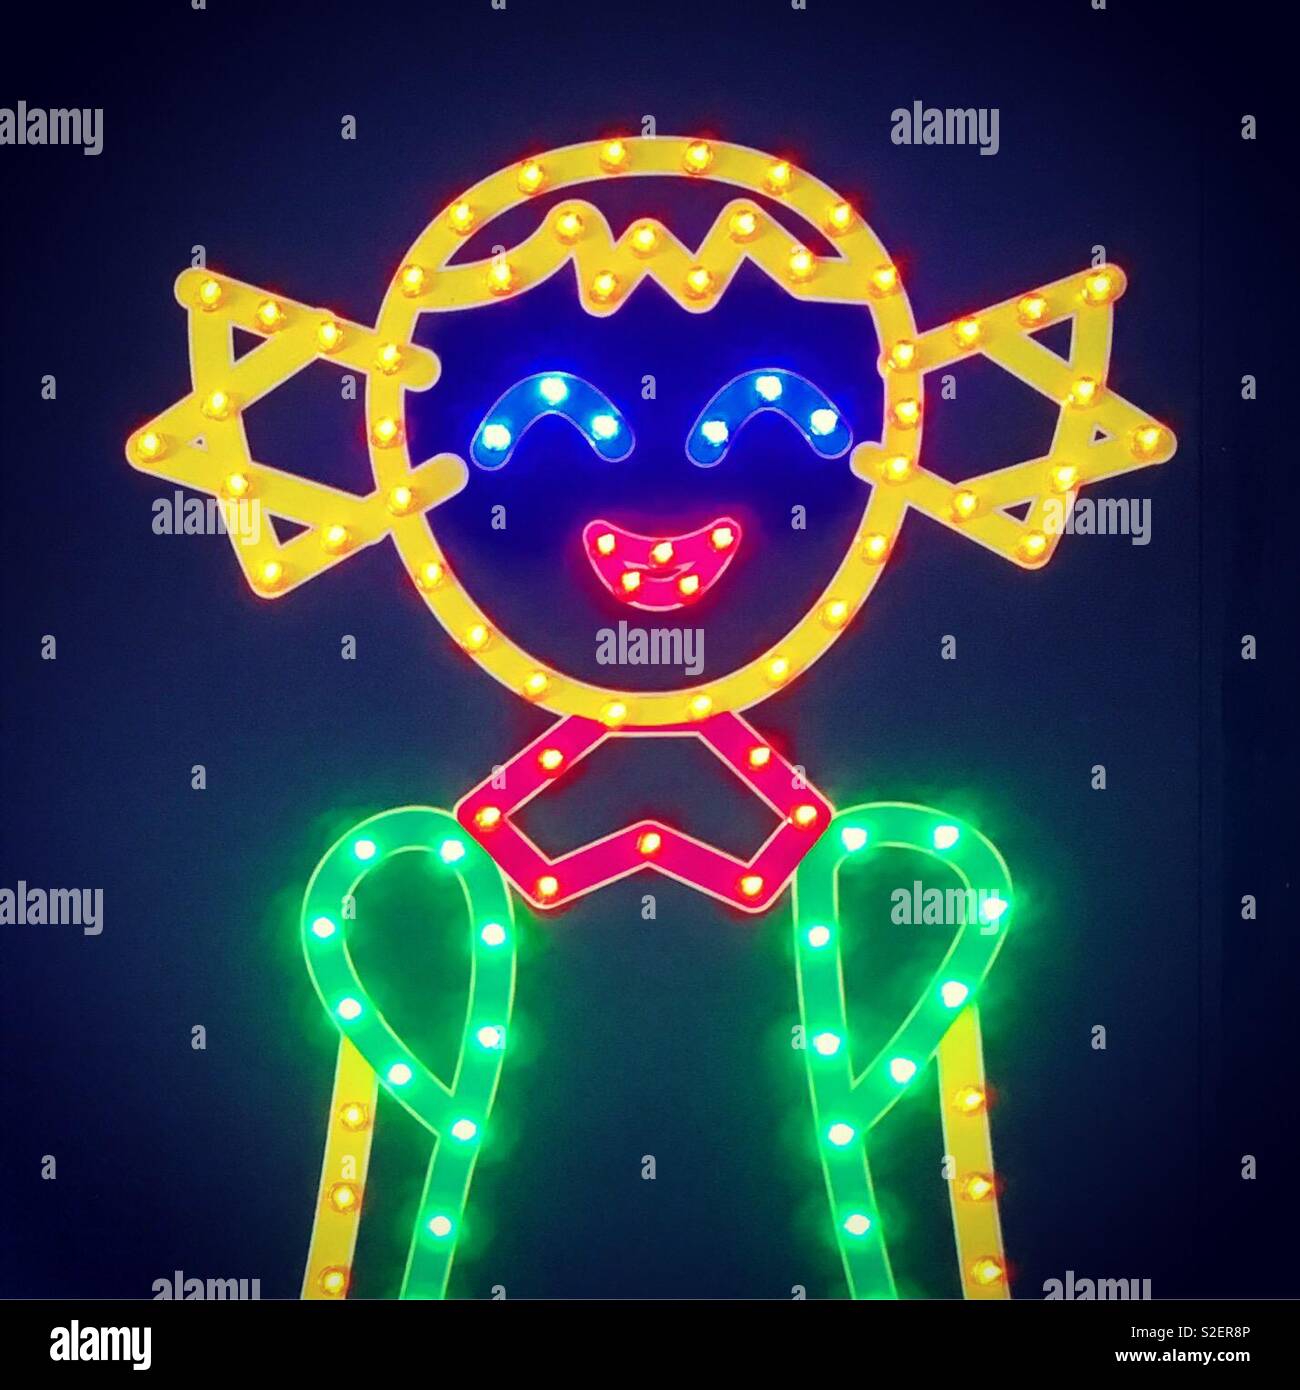 Smiling girl done with glowing neon garlands bulbs Stock Photo